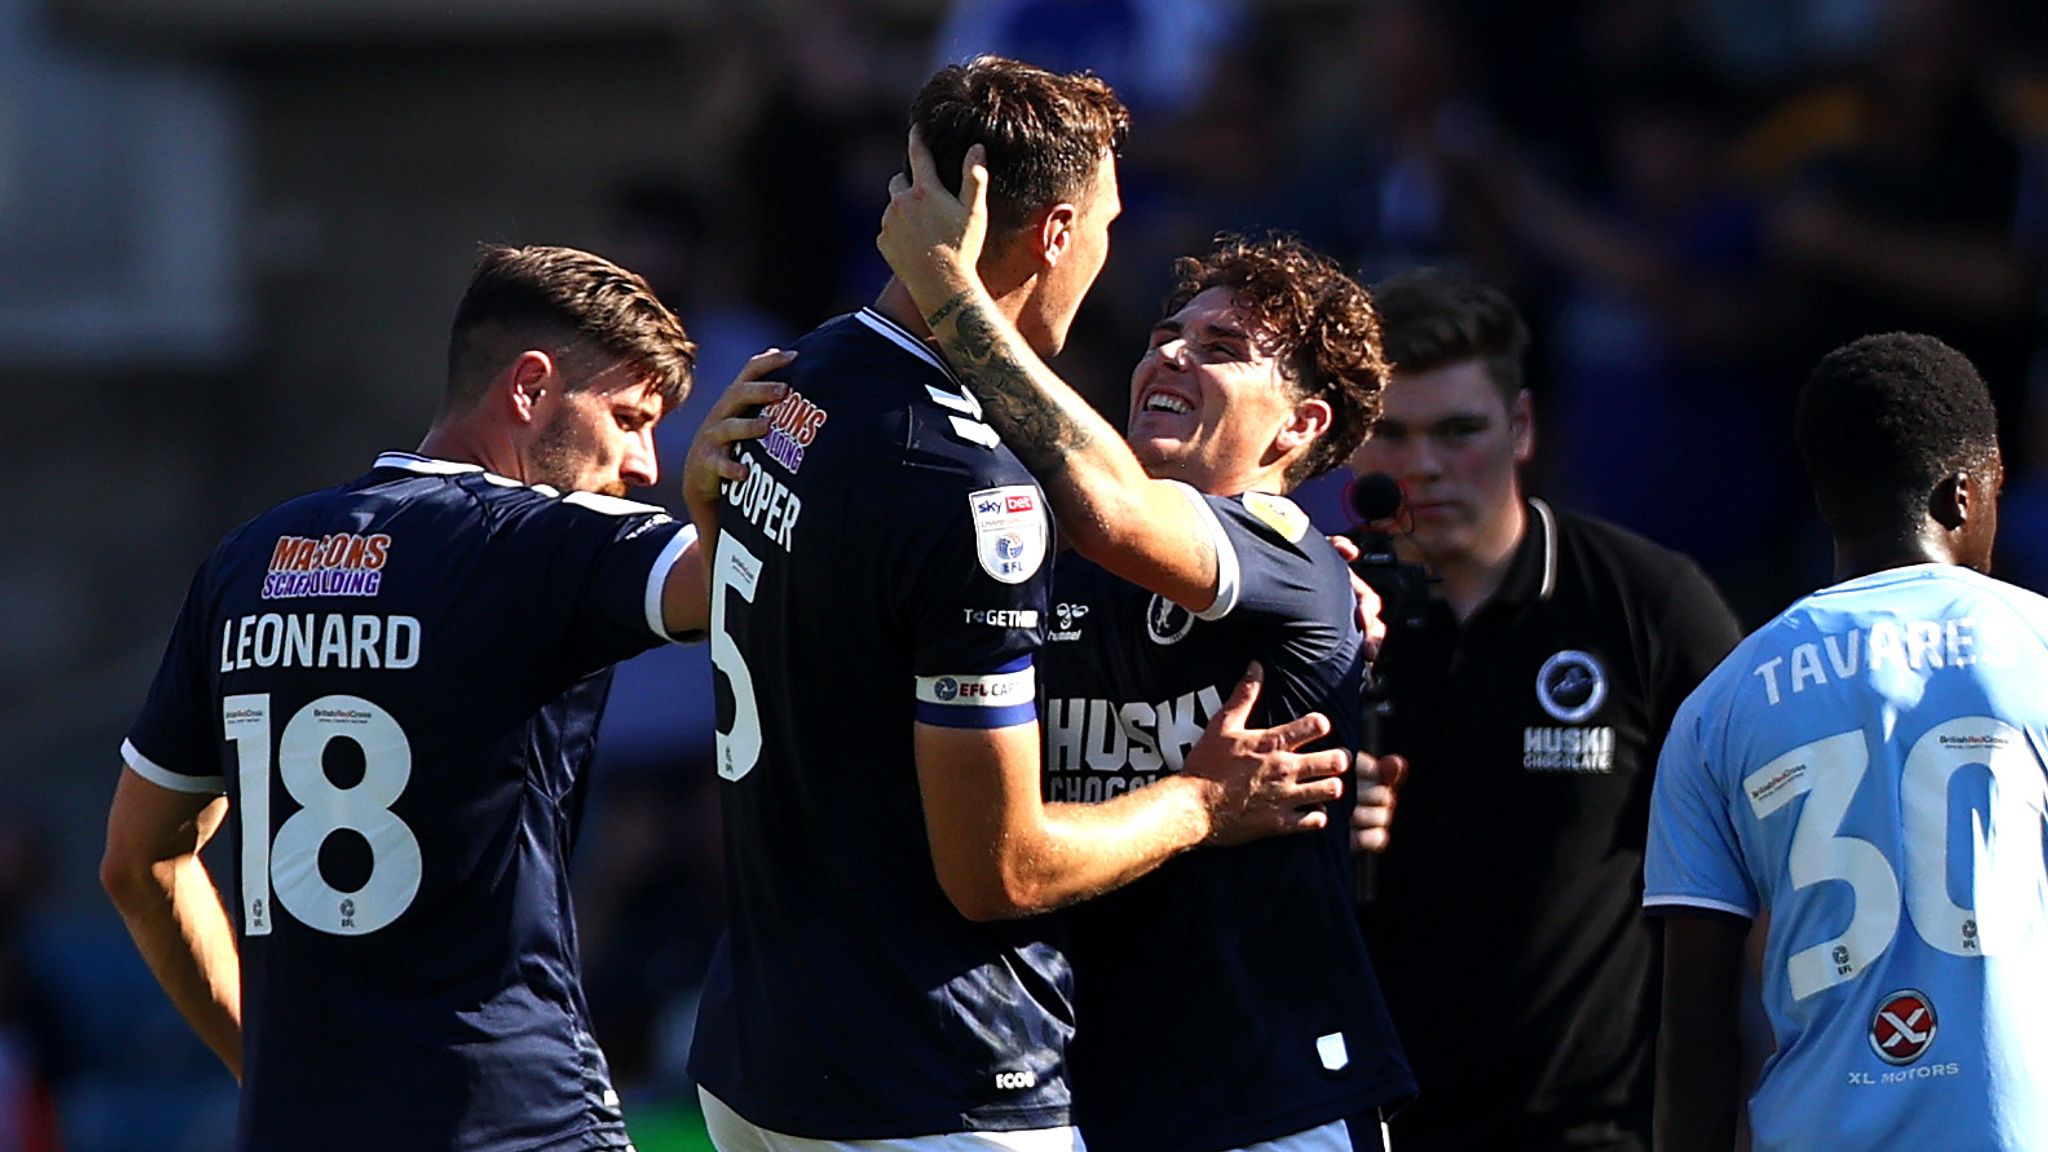 Championship Highlights: Millwall 0-3 Coventry City - Southwark News